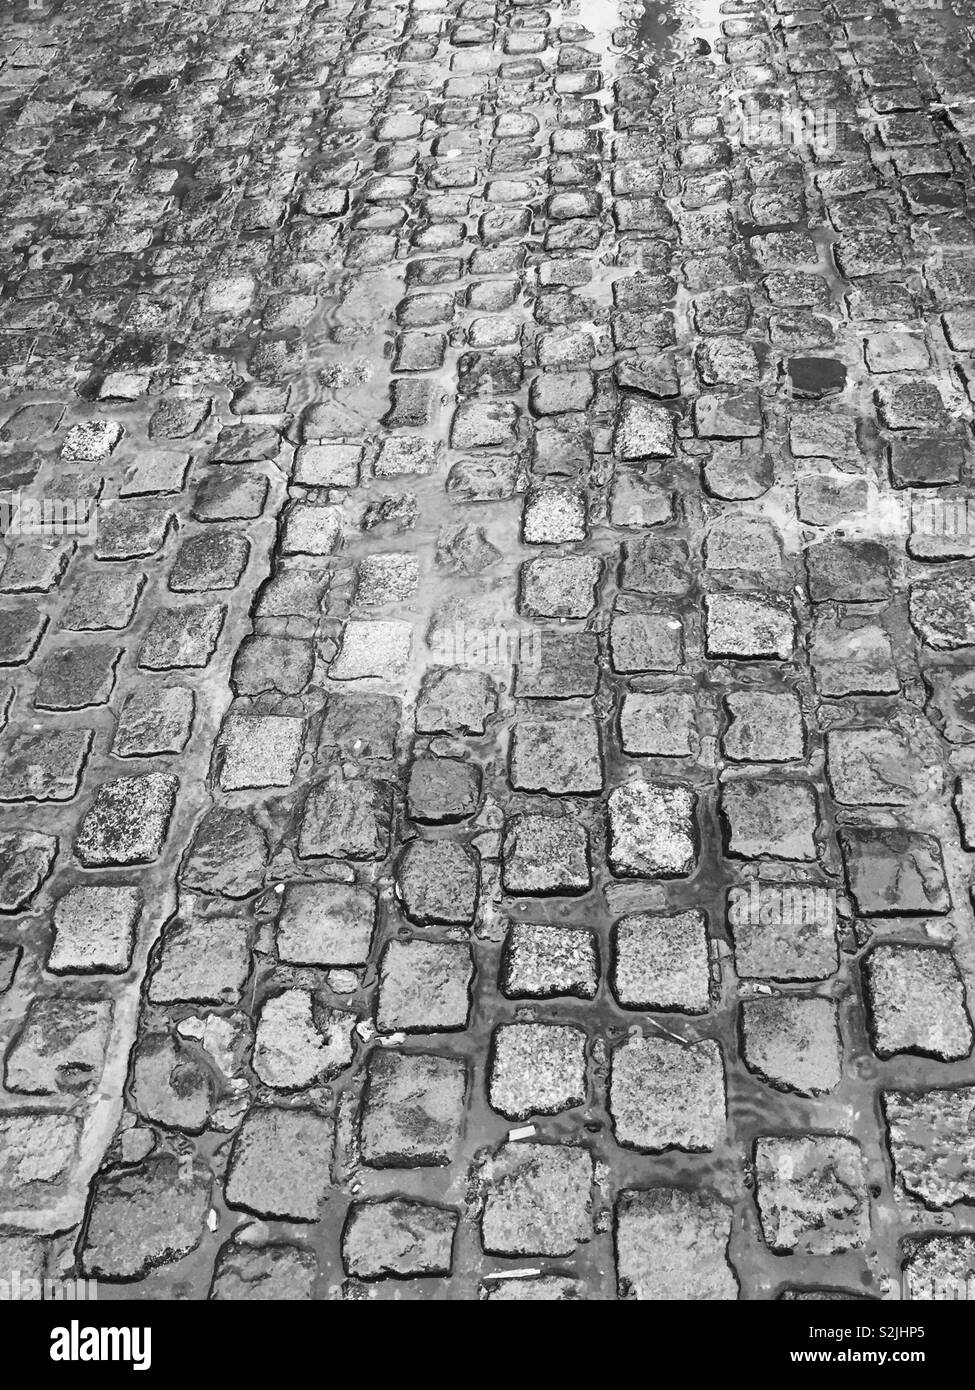 Wet and damp cobblestones on a rainy day.  Rain pouring down on the roads and streets of the ground. Cobbles soaked with rain.  Murky weather.  Cobbled Lane Stock Photo